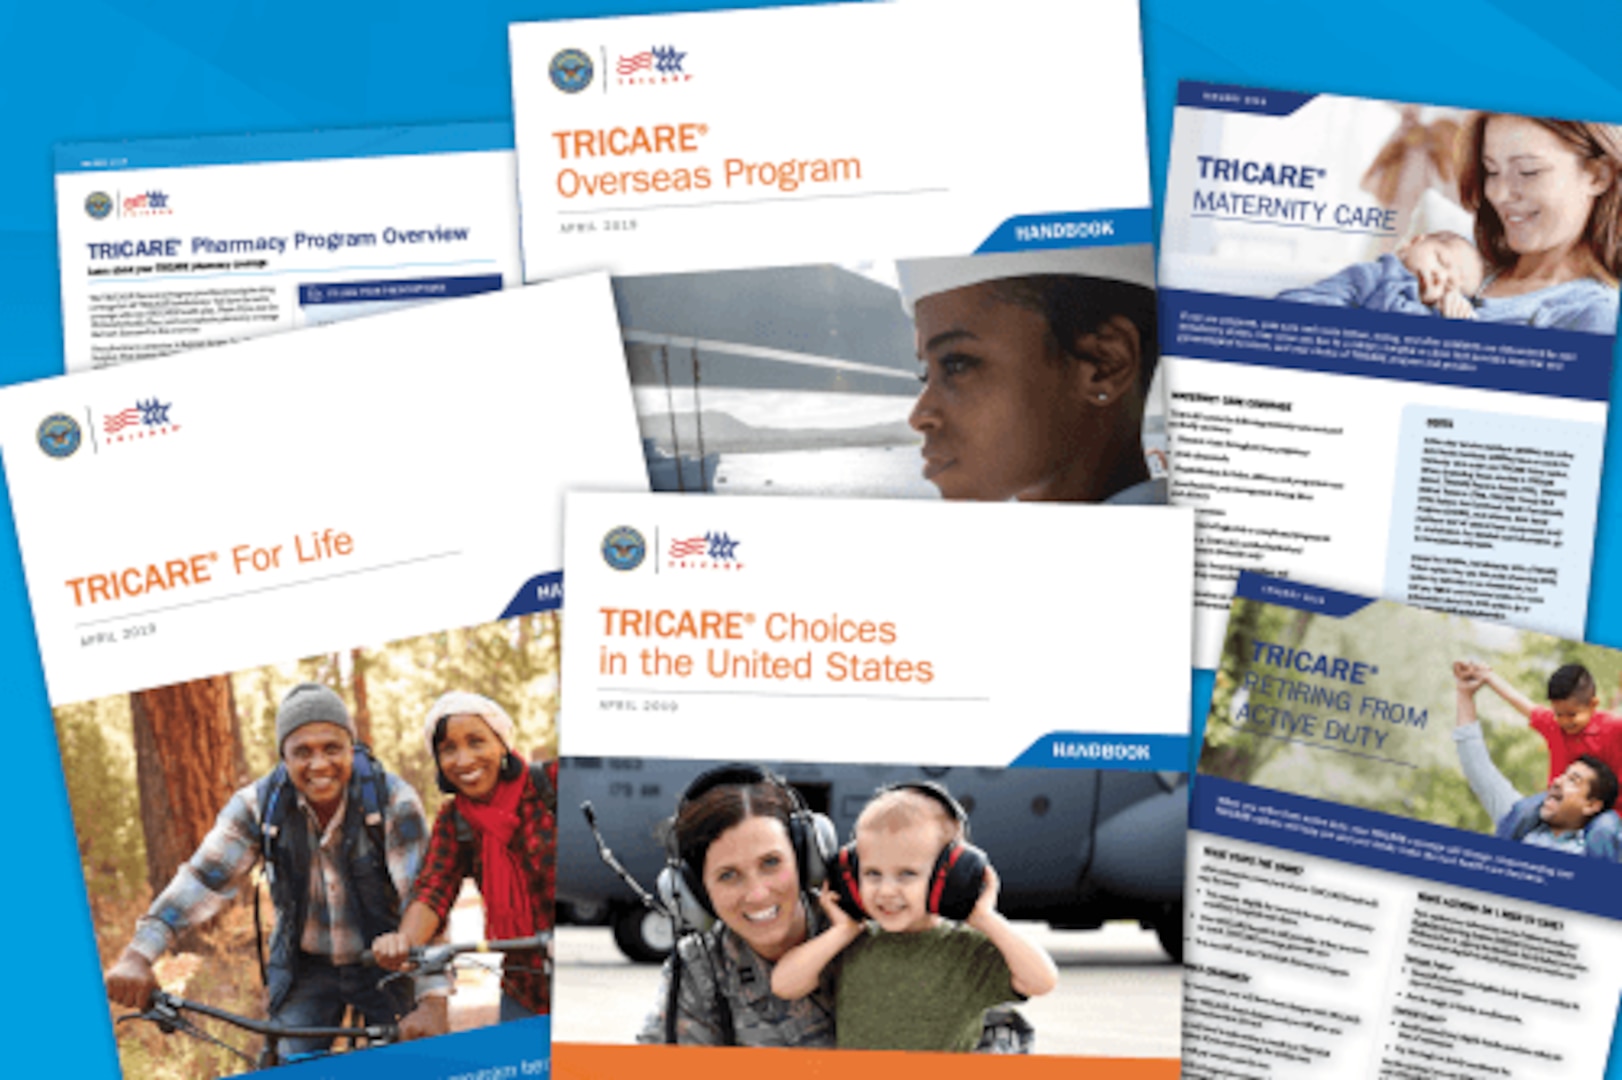 A phot of TRICARE publications covers